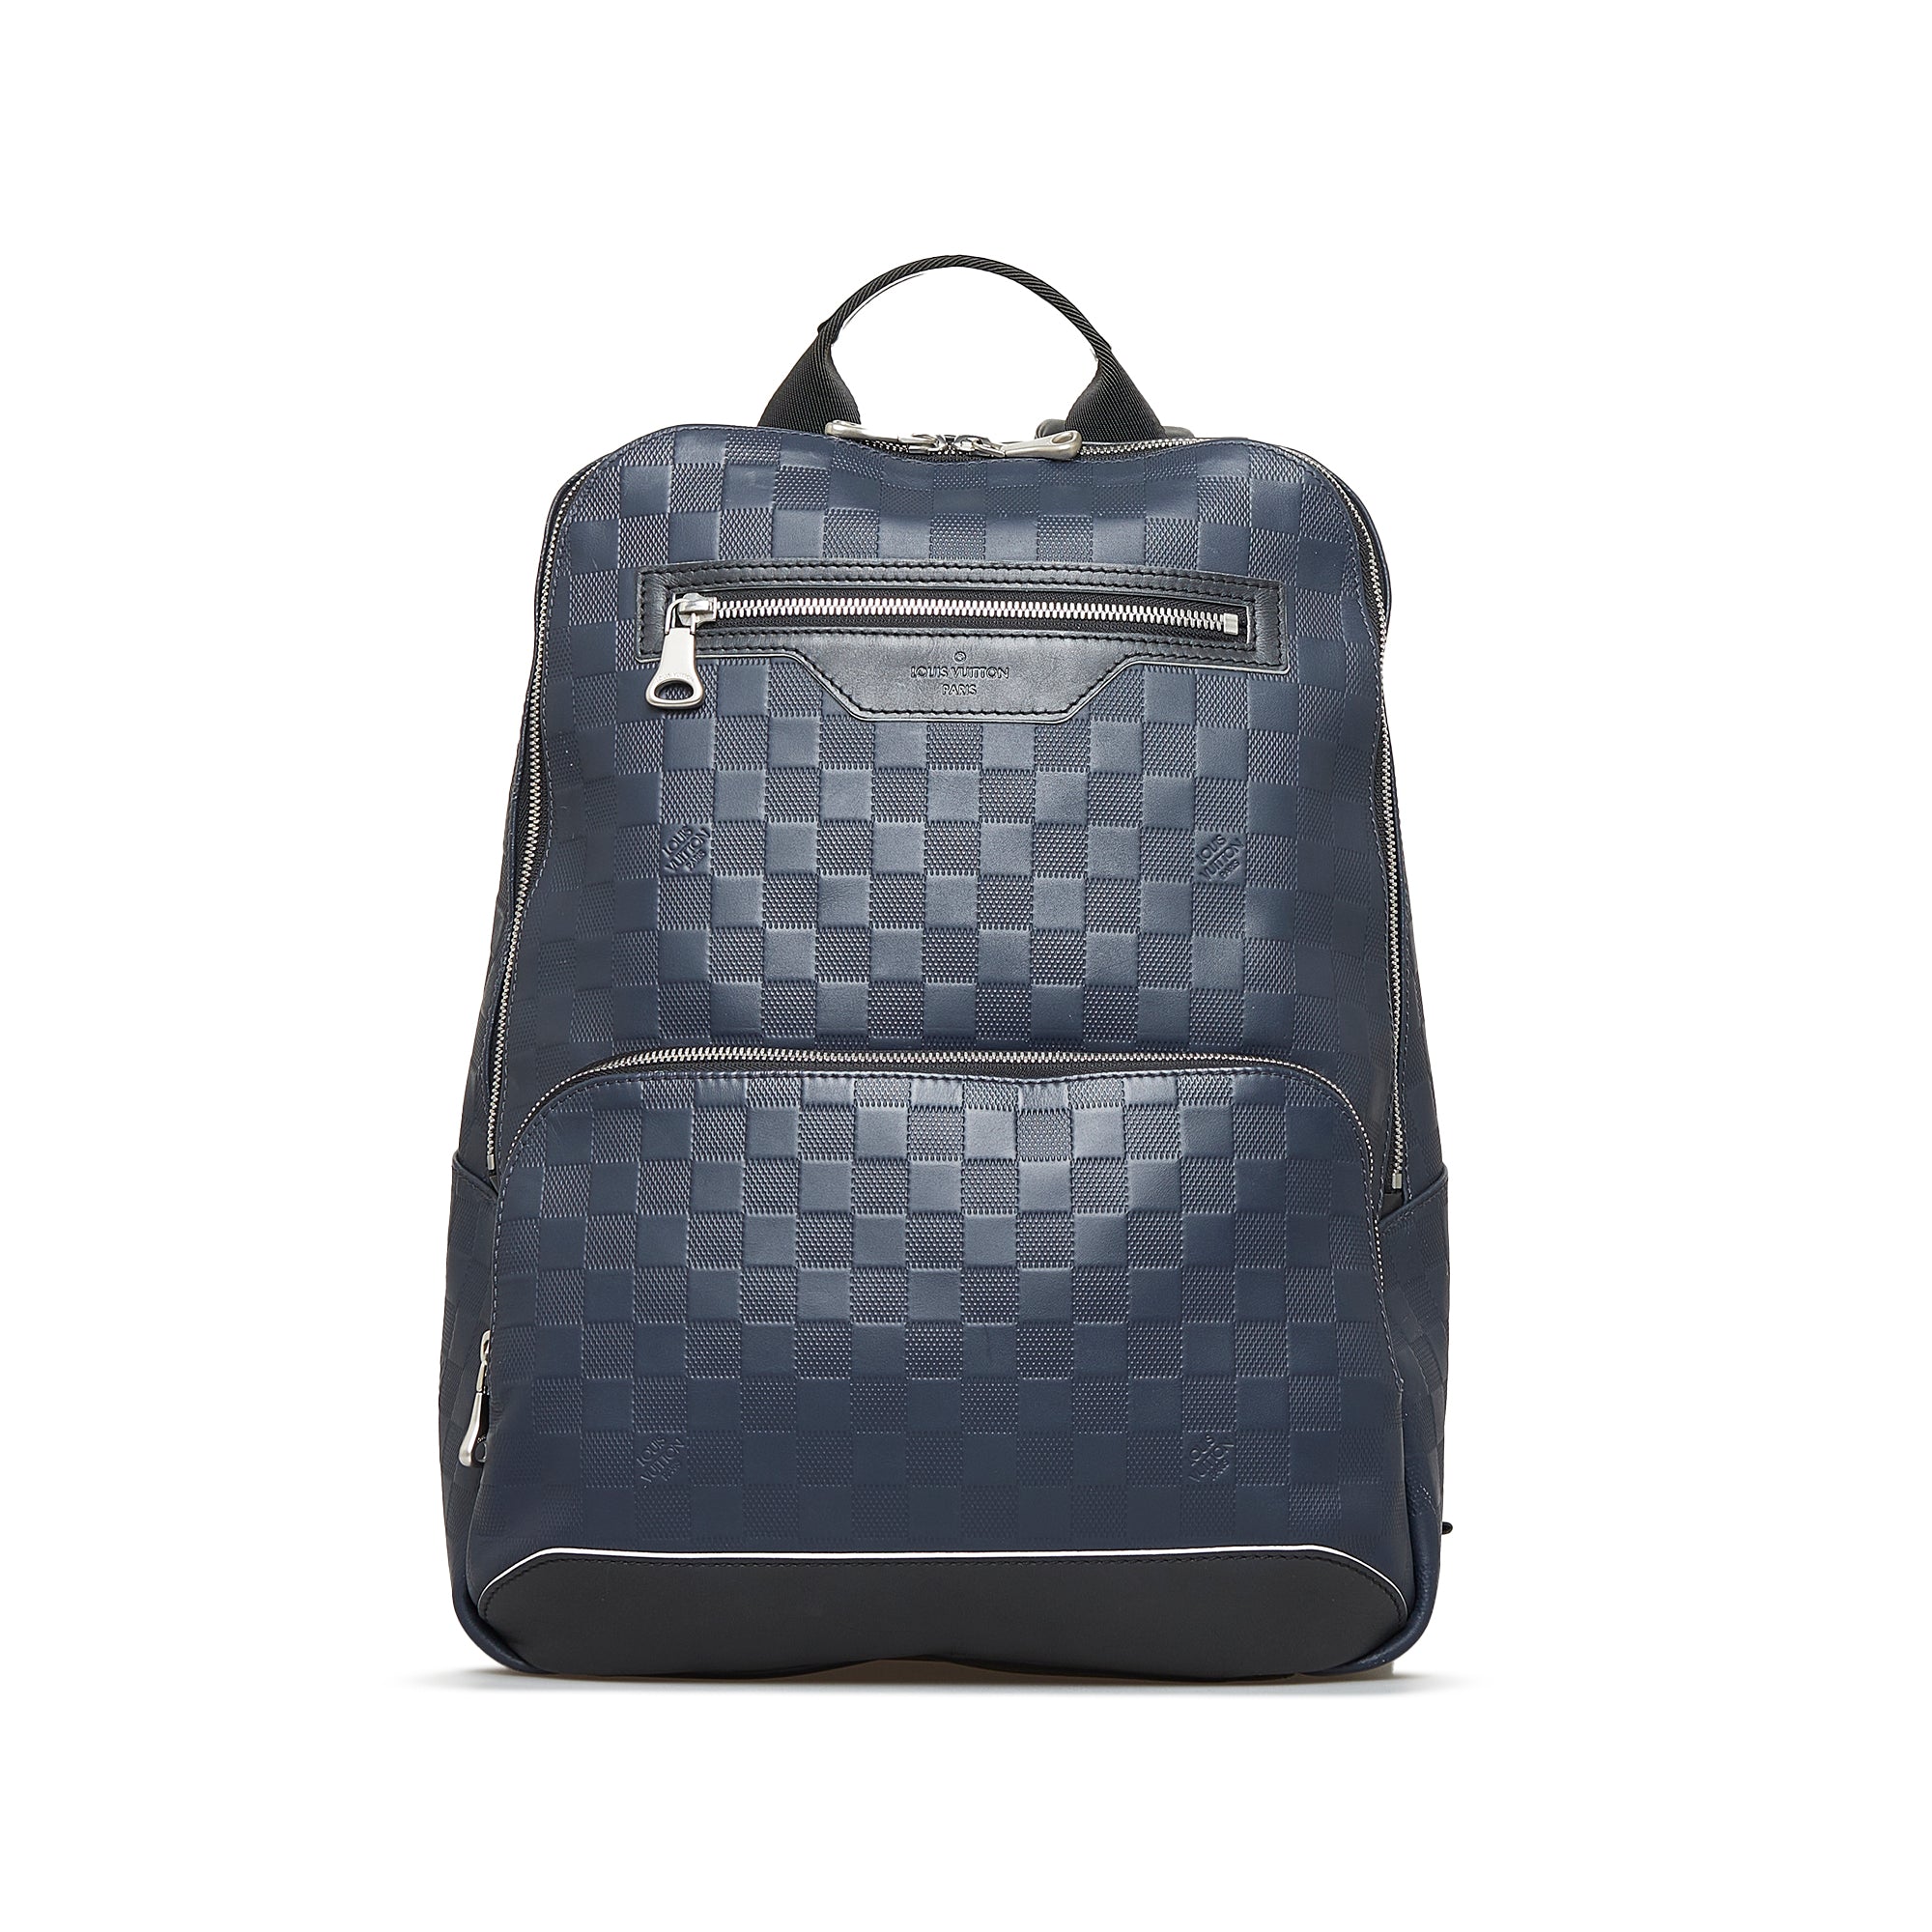 vuitton backpack price